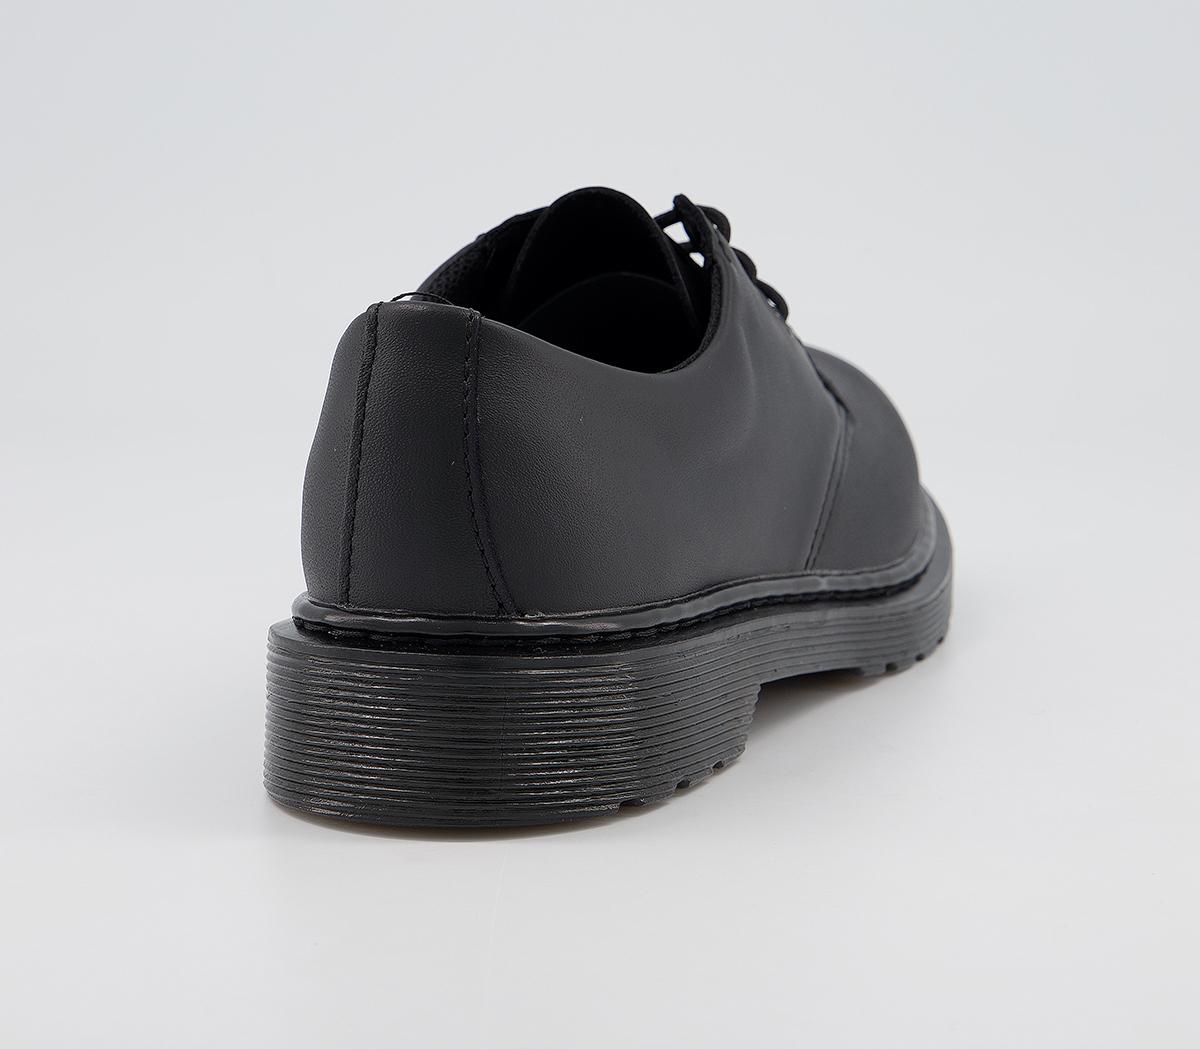 Dr. Martens 1461 3 Eye Youth Shoes Black Softly Mono - Flat Shoes for Women